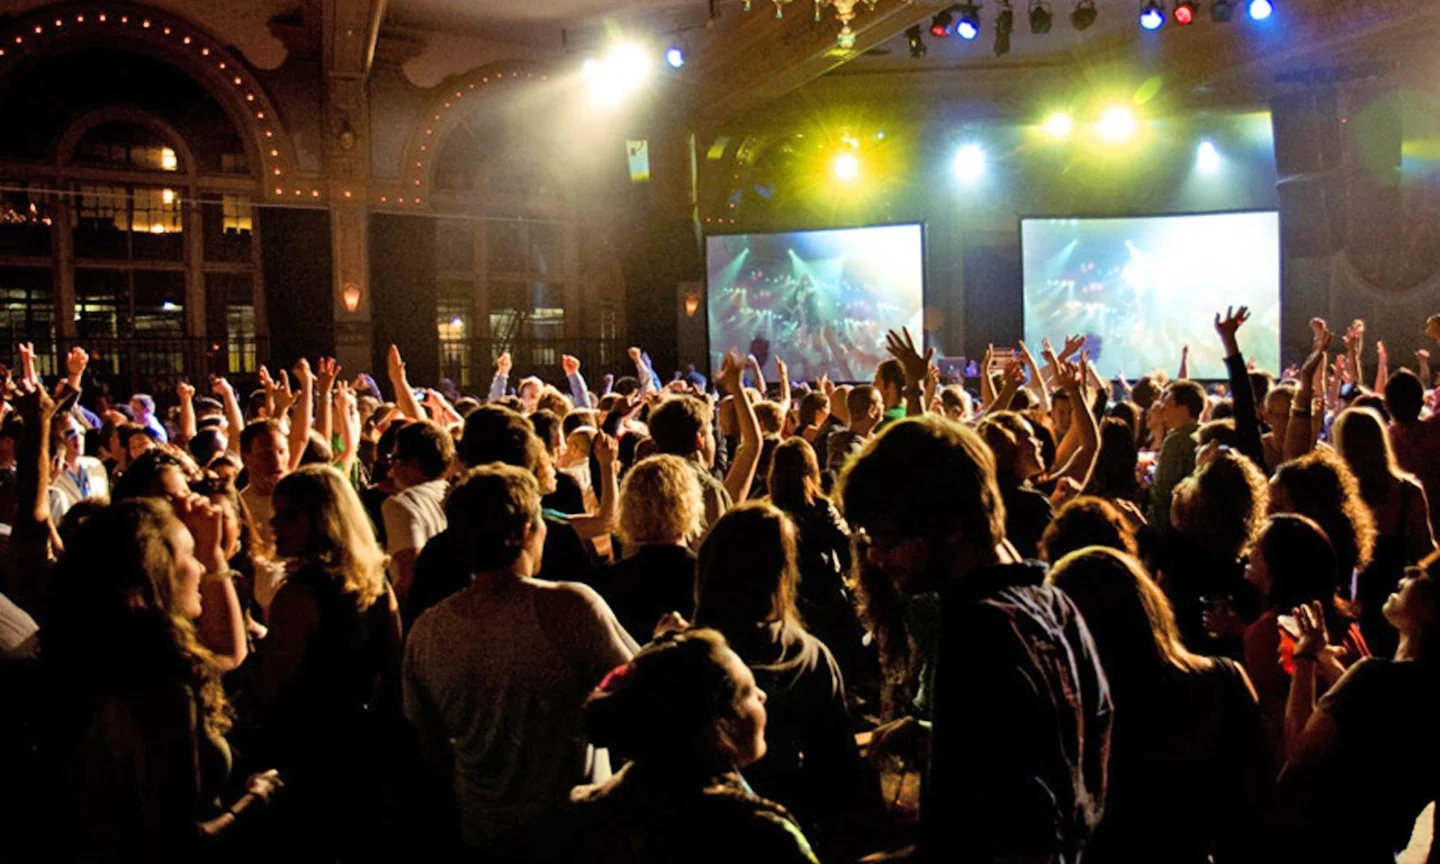 Pick up the Methodology for Booking Corporate Entertainment